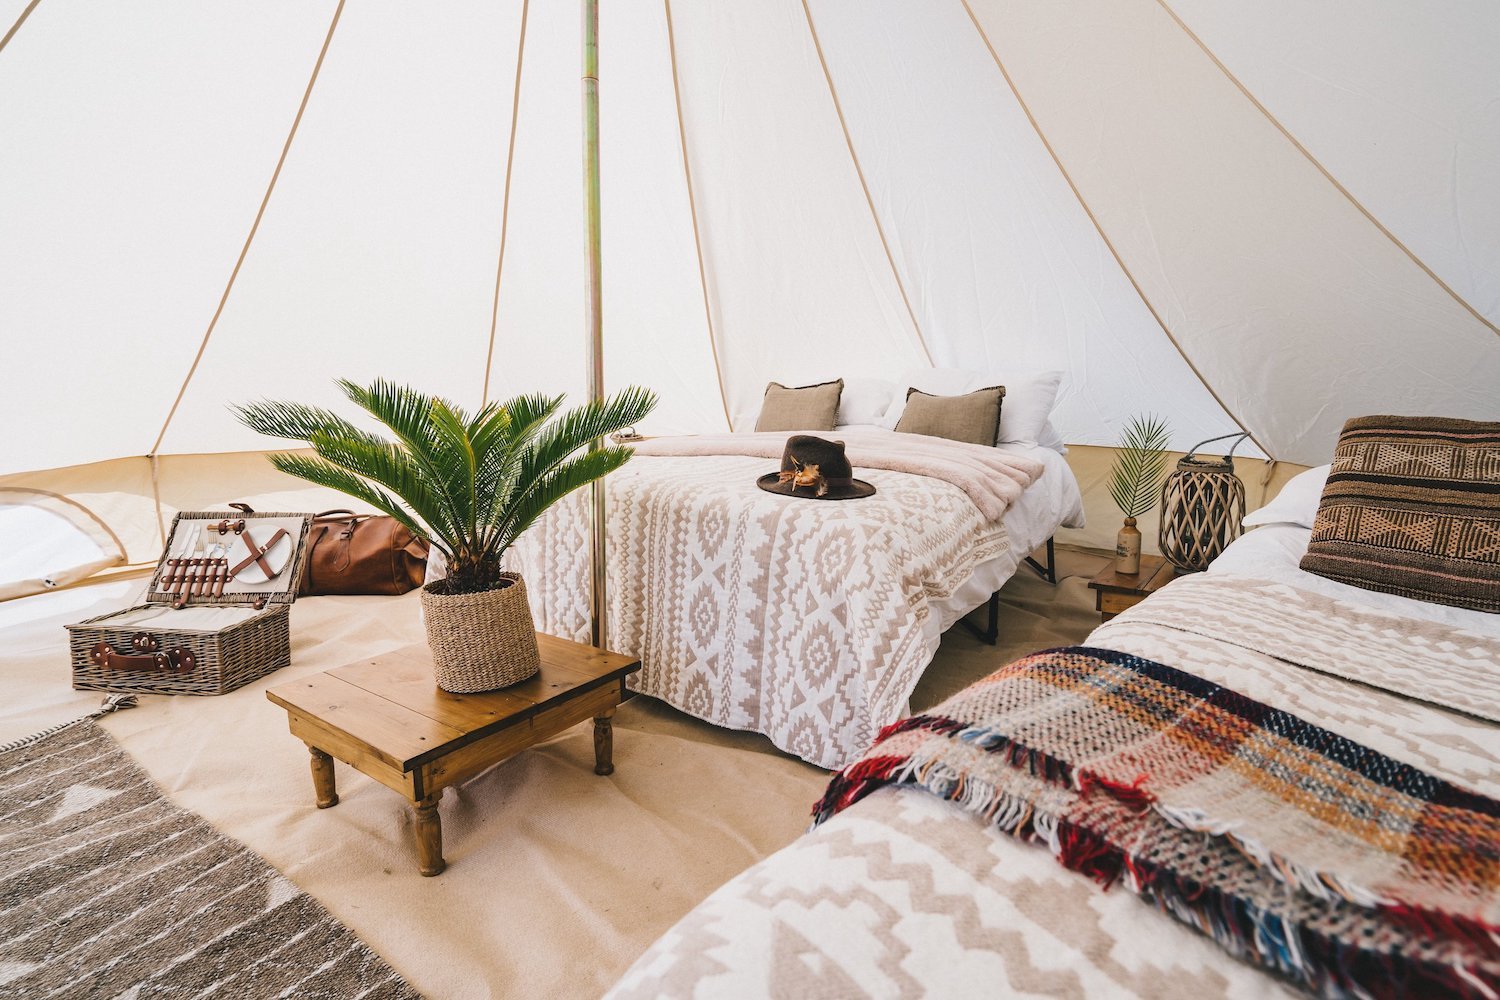 Win glamping for 1 at Flow’s Summertime Jam worth £595